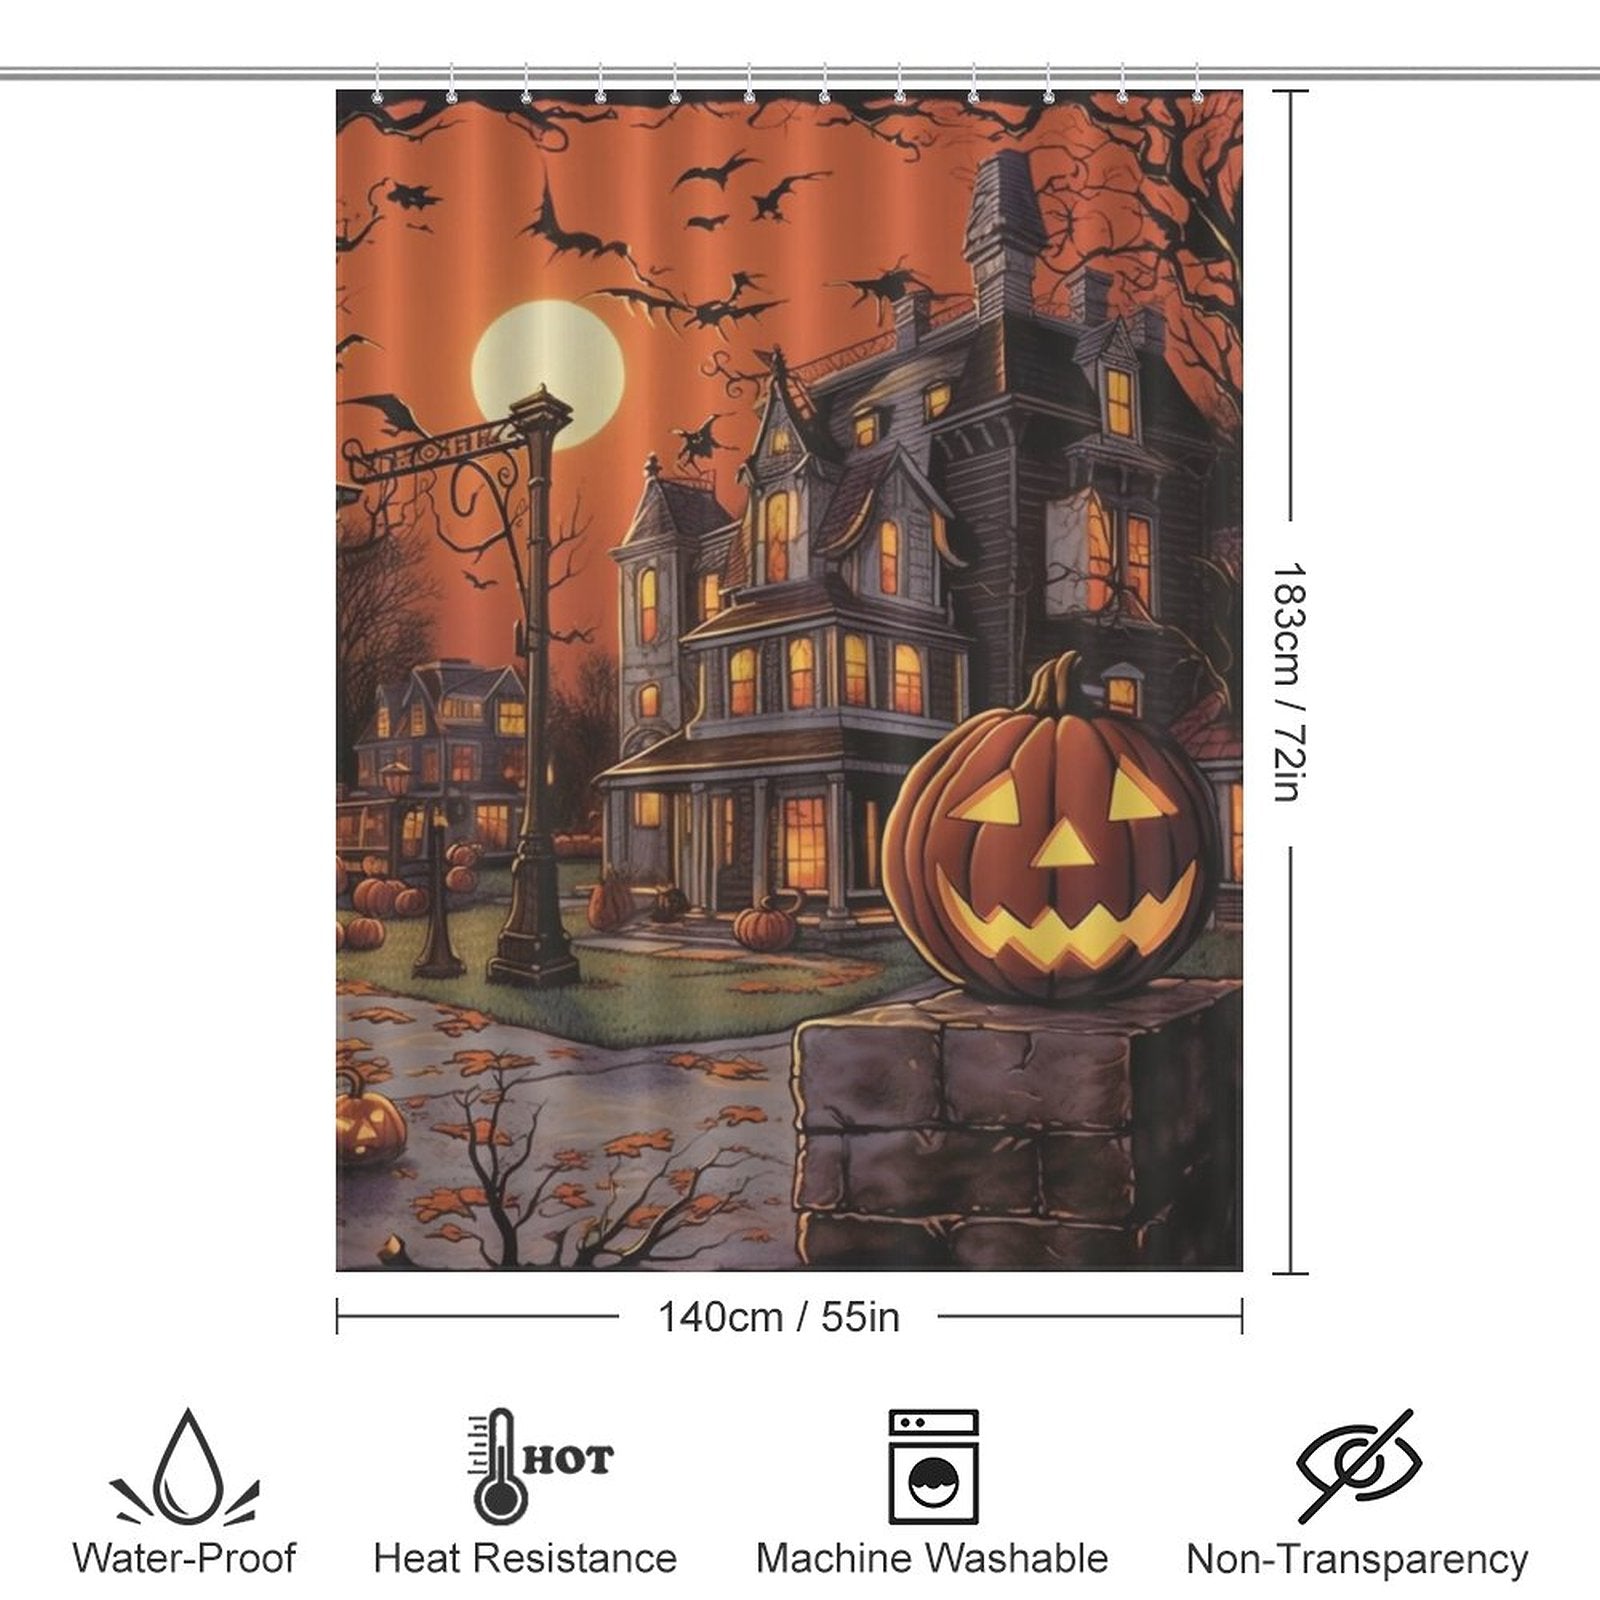 A Pumpkin Halloween Shower Curtain-Cottoncat featuring a 90s-style design with a jack o lantern and pumpkins, made by Cotton Cat.